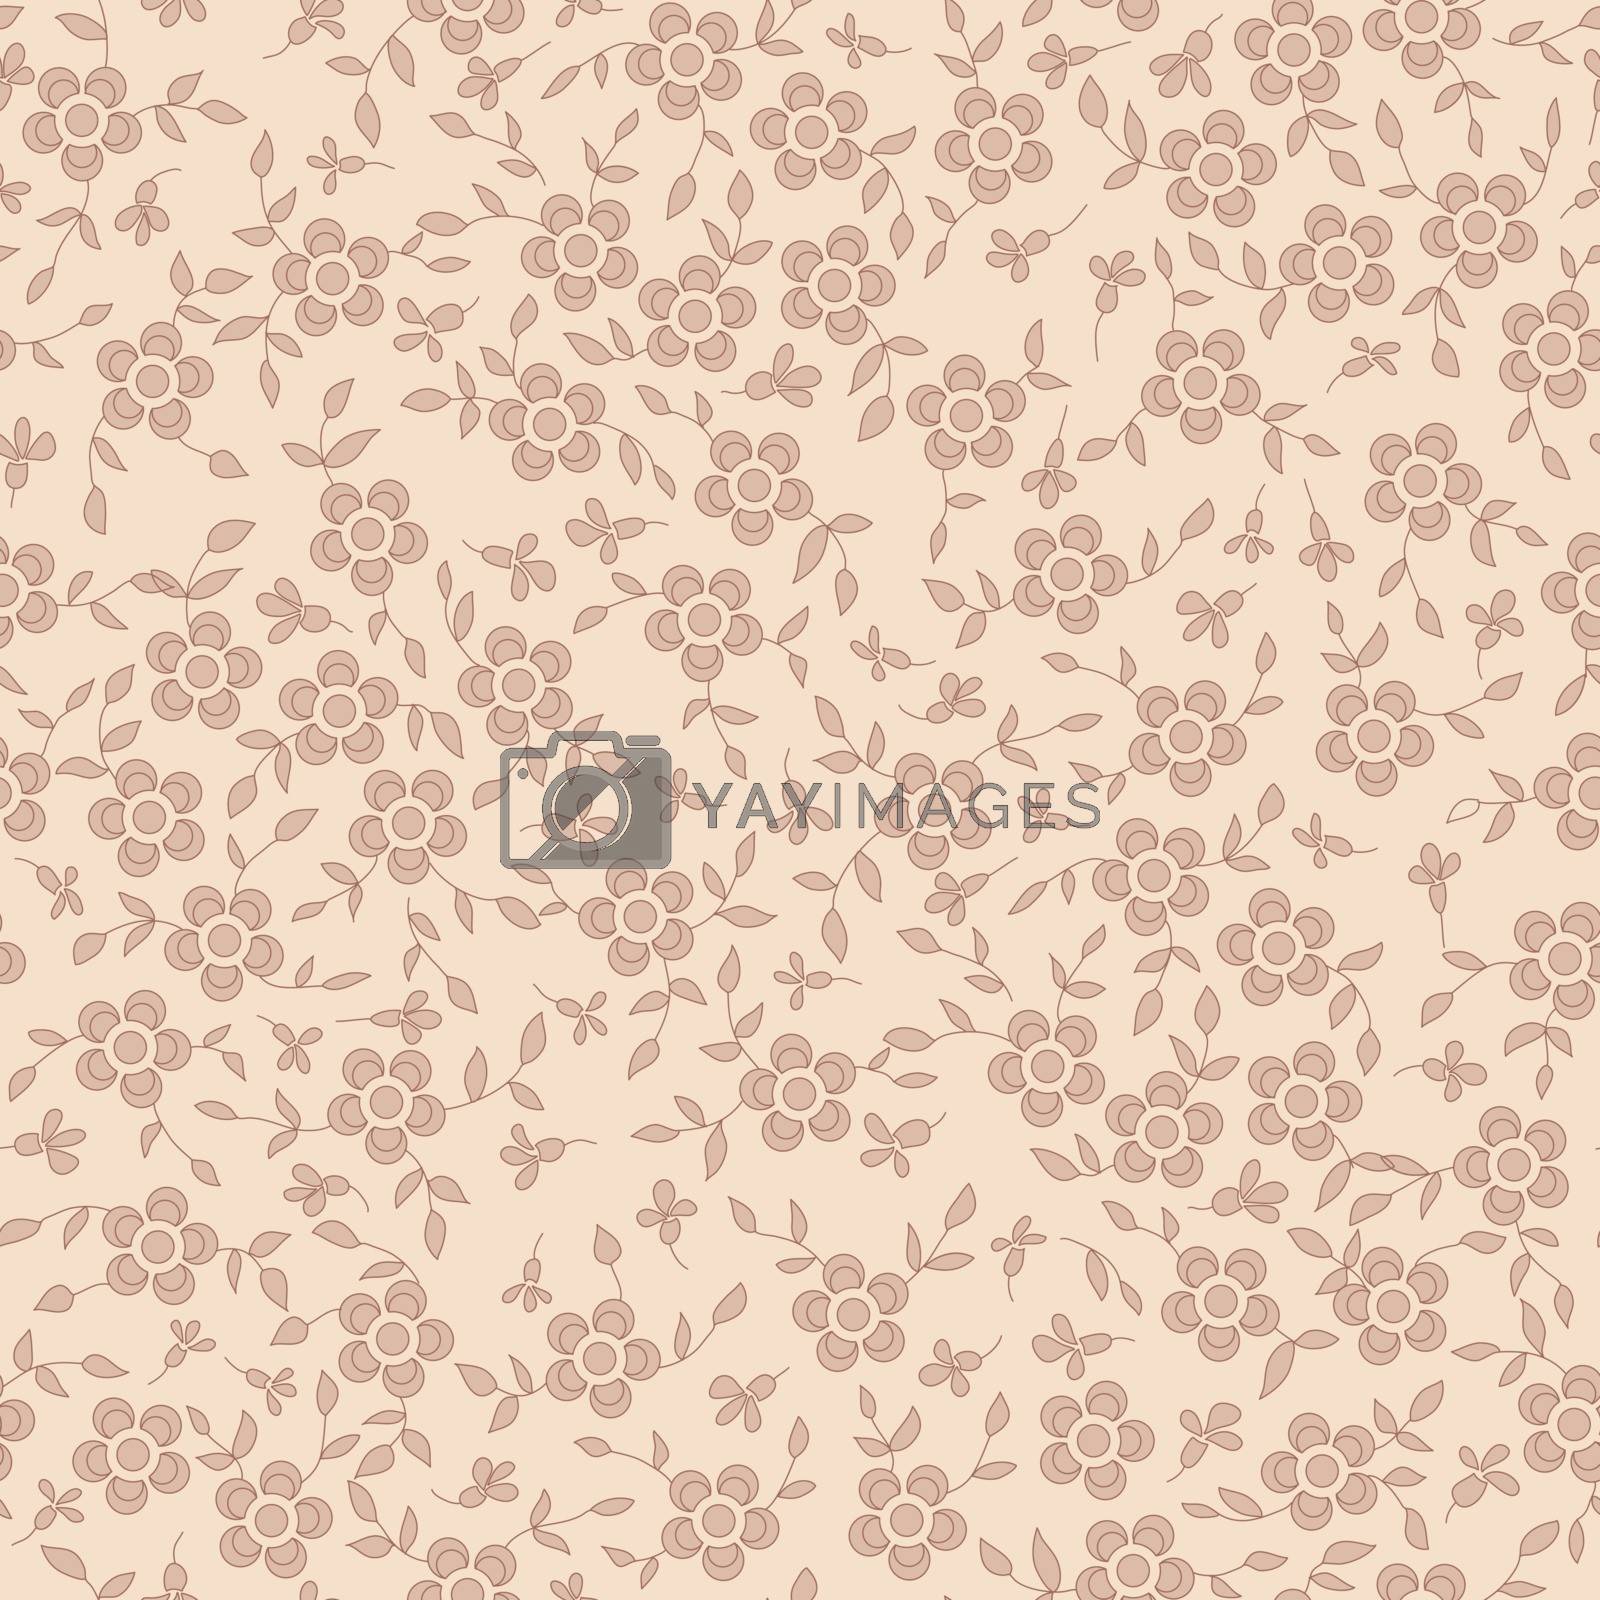 Royalty free image of flower, twig and leaf. beige by LittleCuckoo